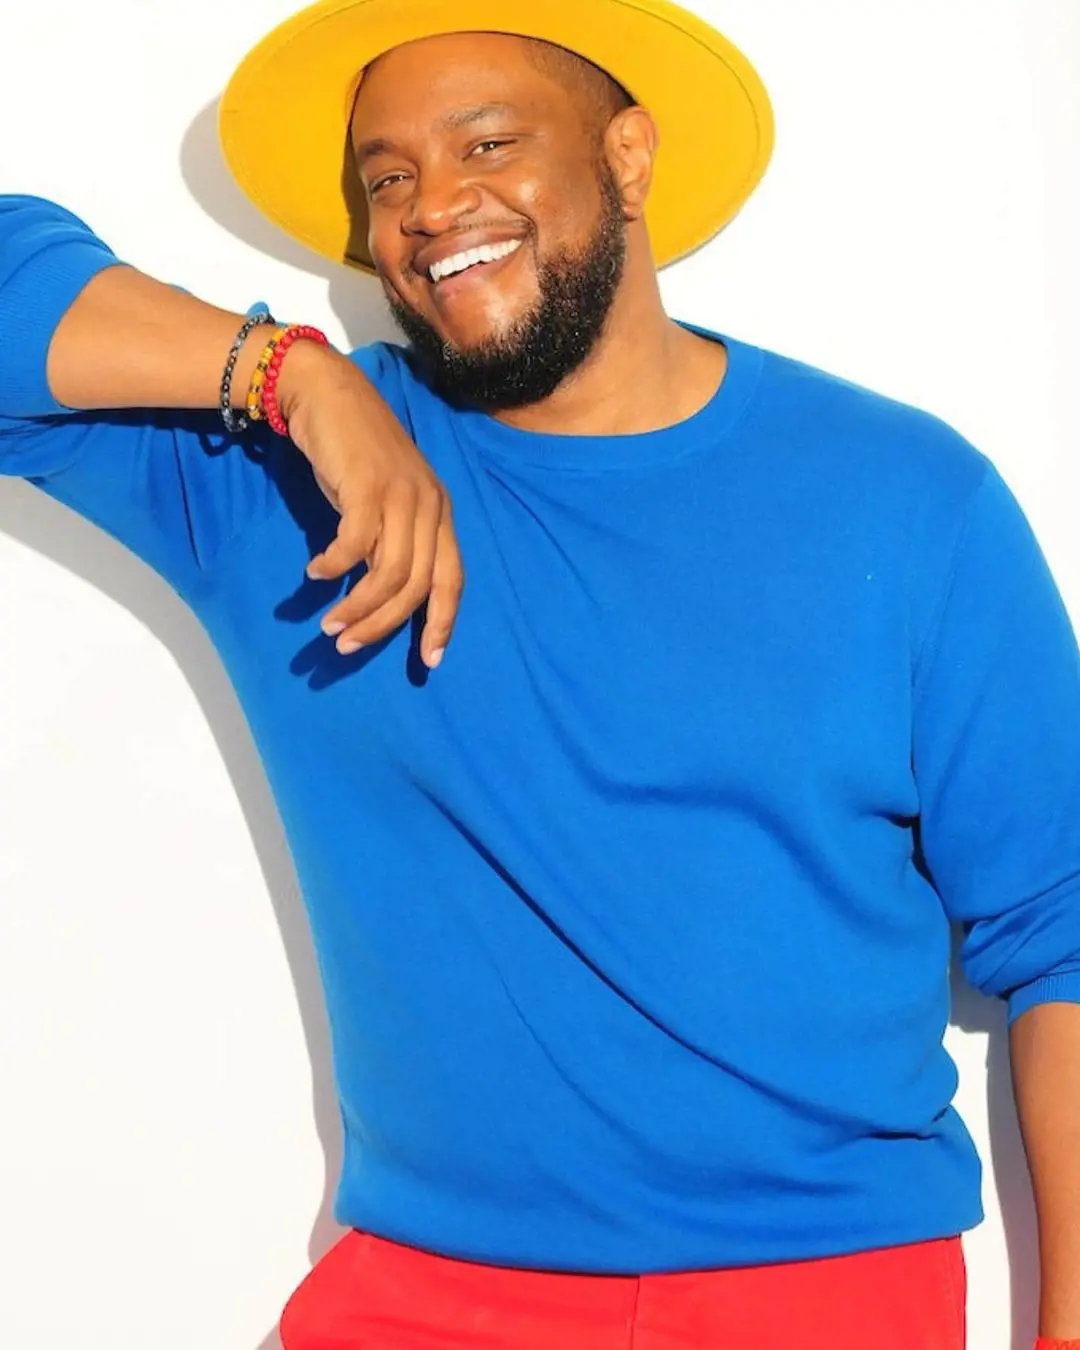 Tauheed looks dashing in a blue top and yellow hat as he poses for a picture